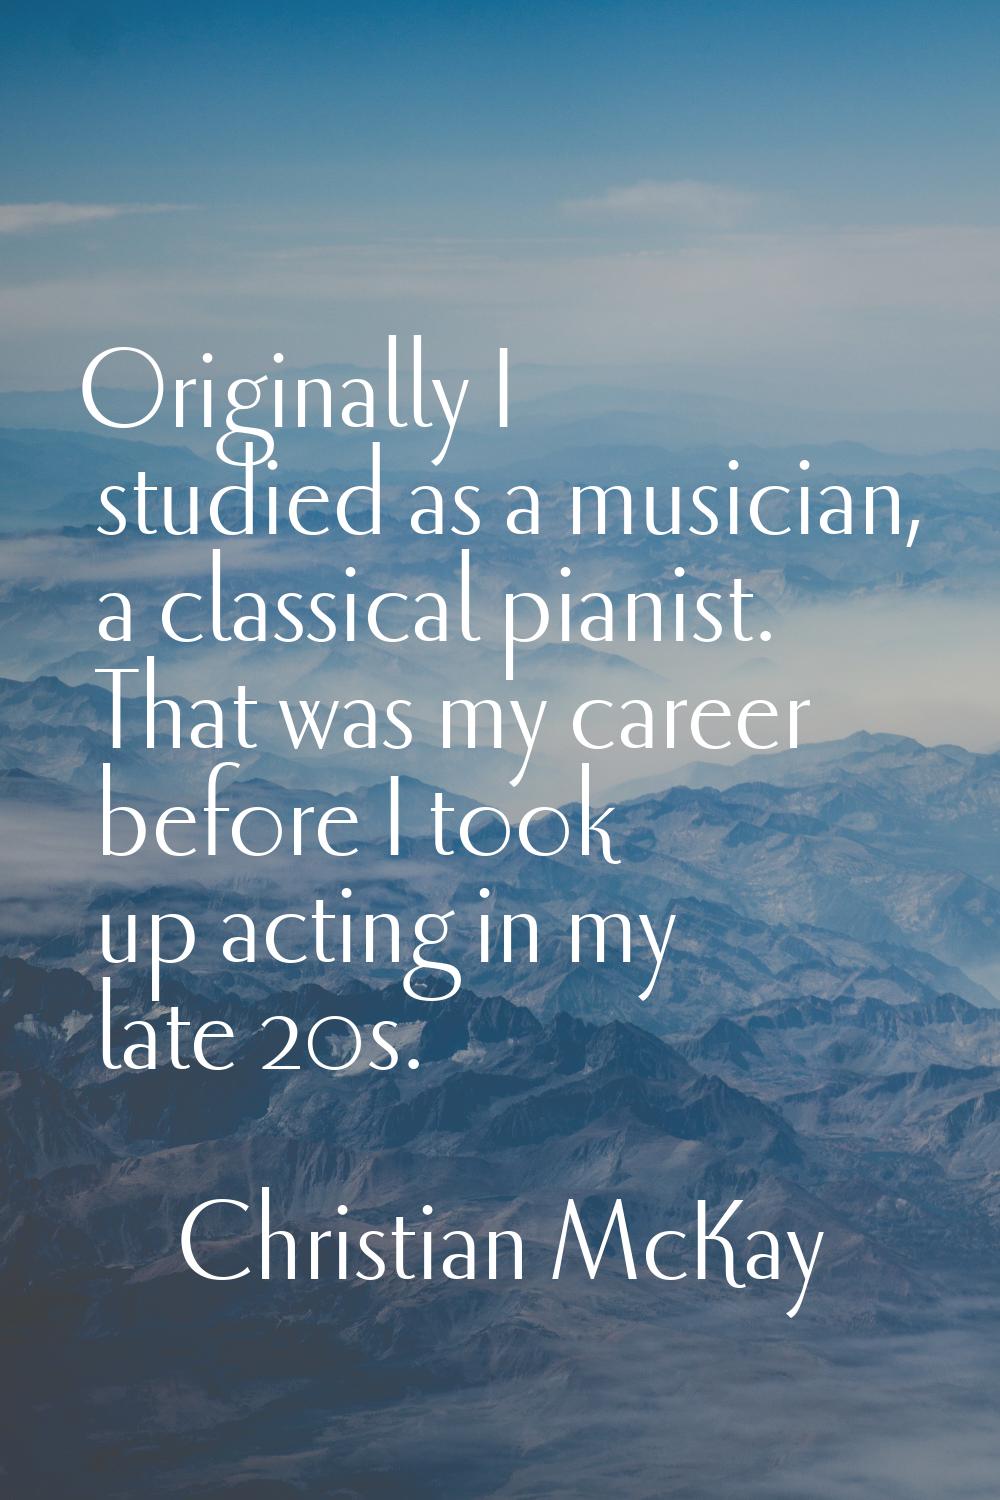 Originally I studied as a musician, a classical pianist. That was my career before I took up acting